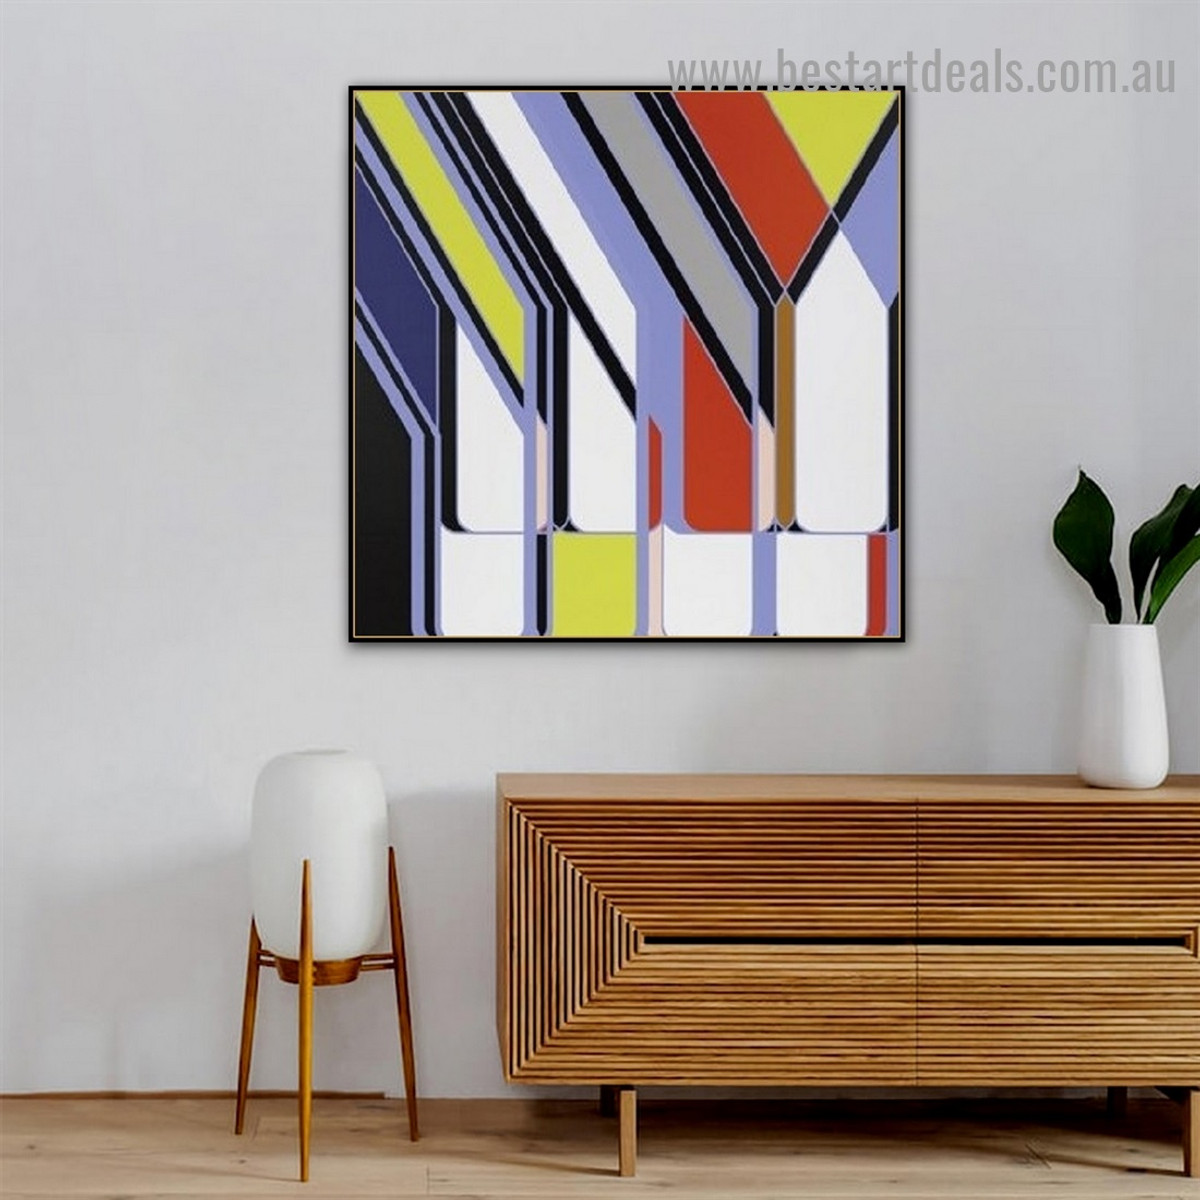 Colorful Concrete Design Abstract Modern Framed Artwork Photo Canvas Print for Room Wall Garnish